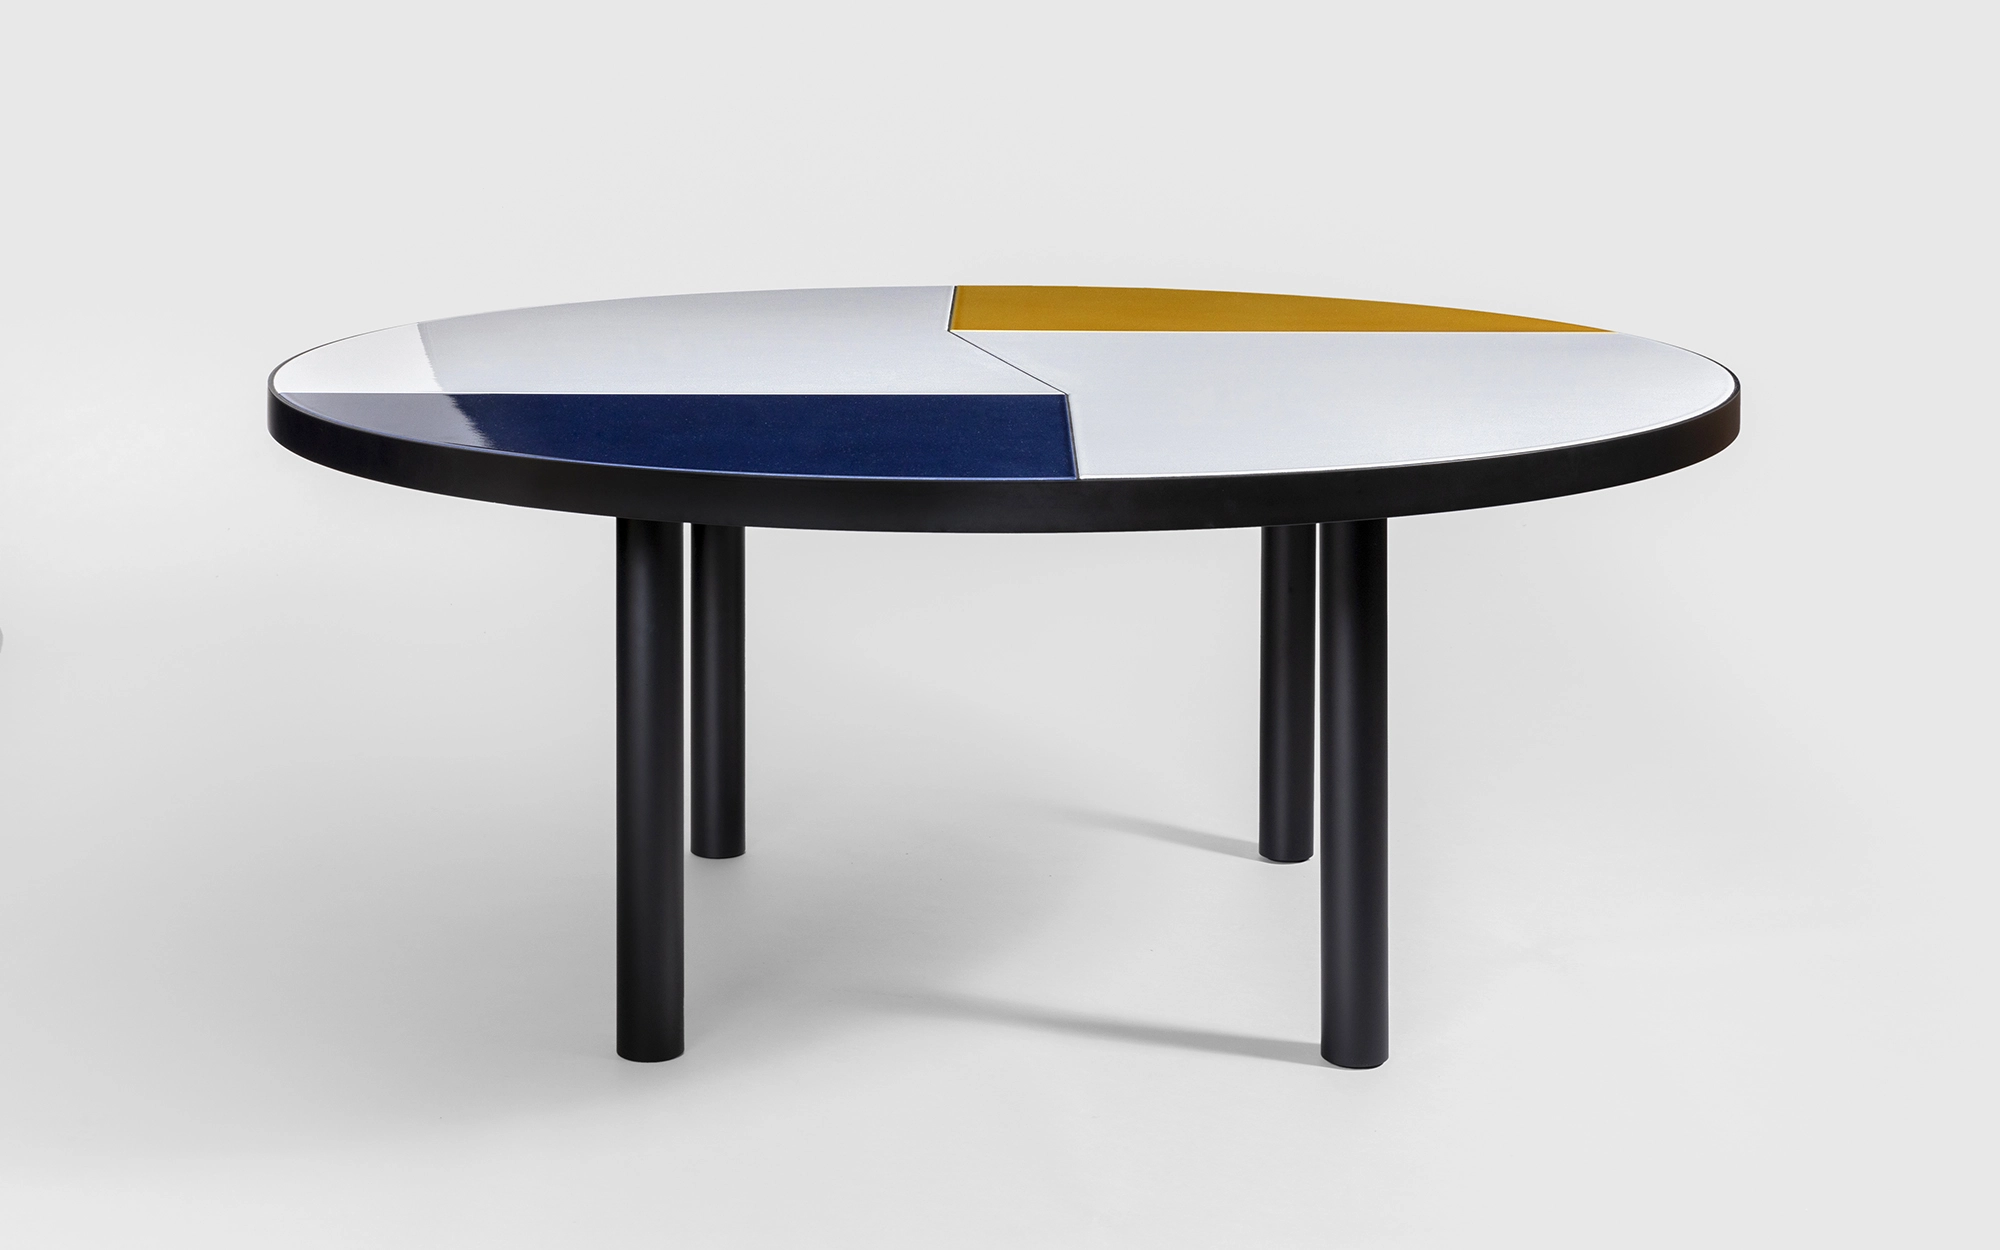 Fraction Dining Table - Pierre Charpin - Art and Drawing - Galerie kreo